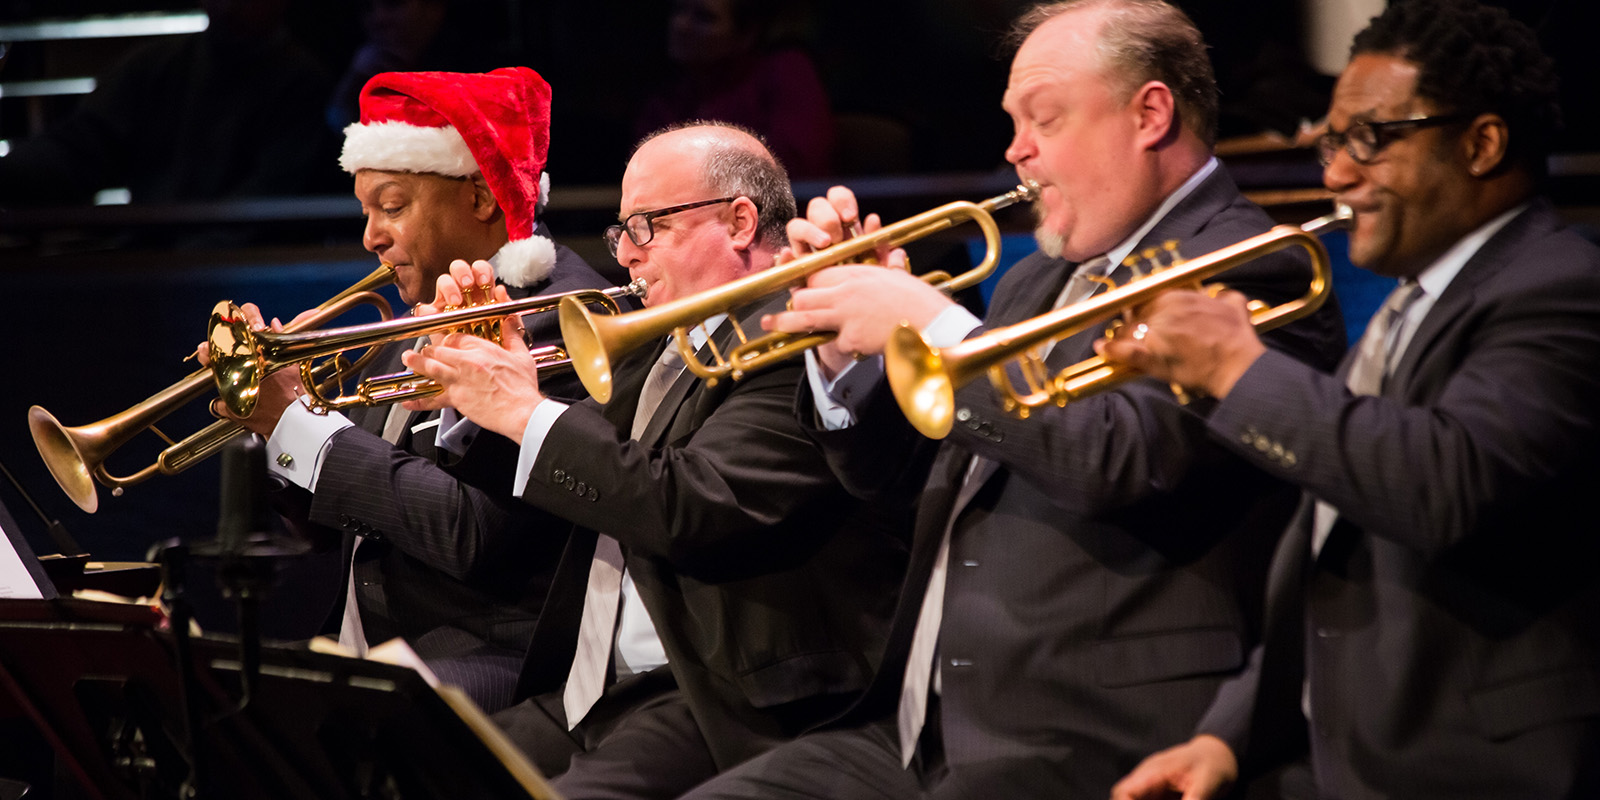 Two men play trumpets while looking at music. One wears a red Santa Claus hat.